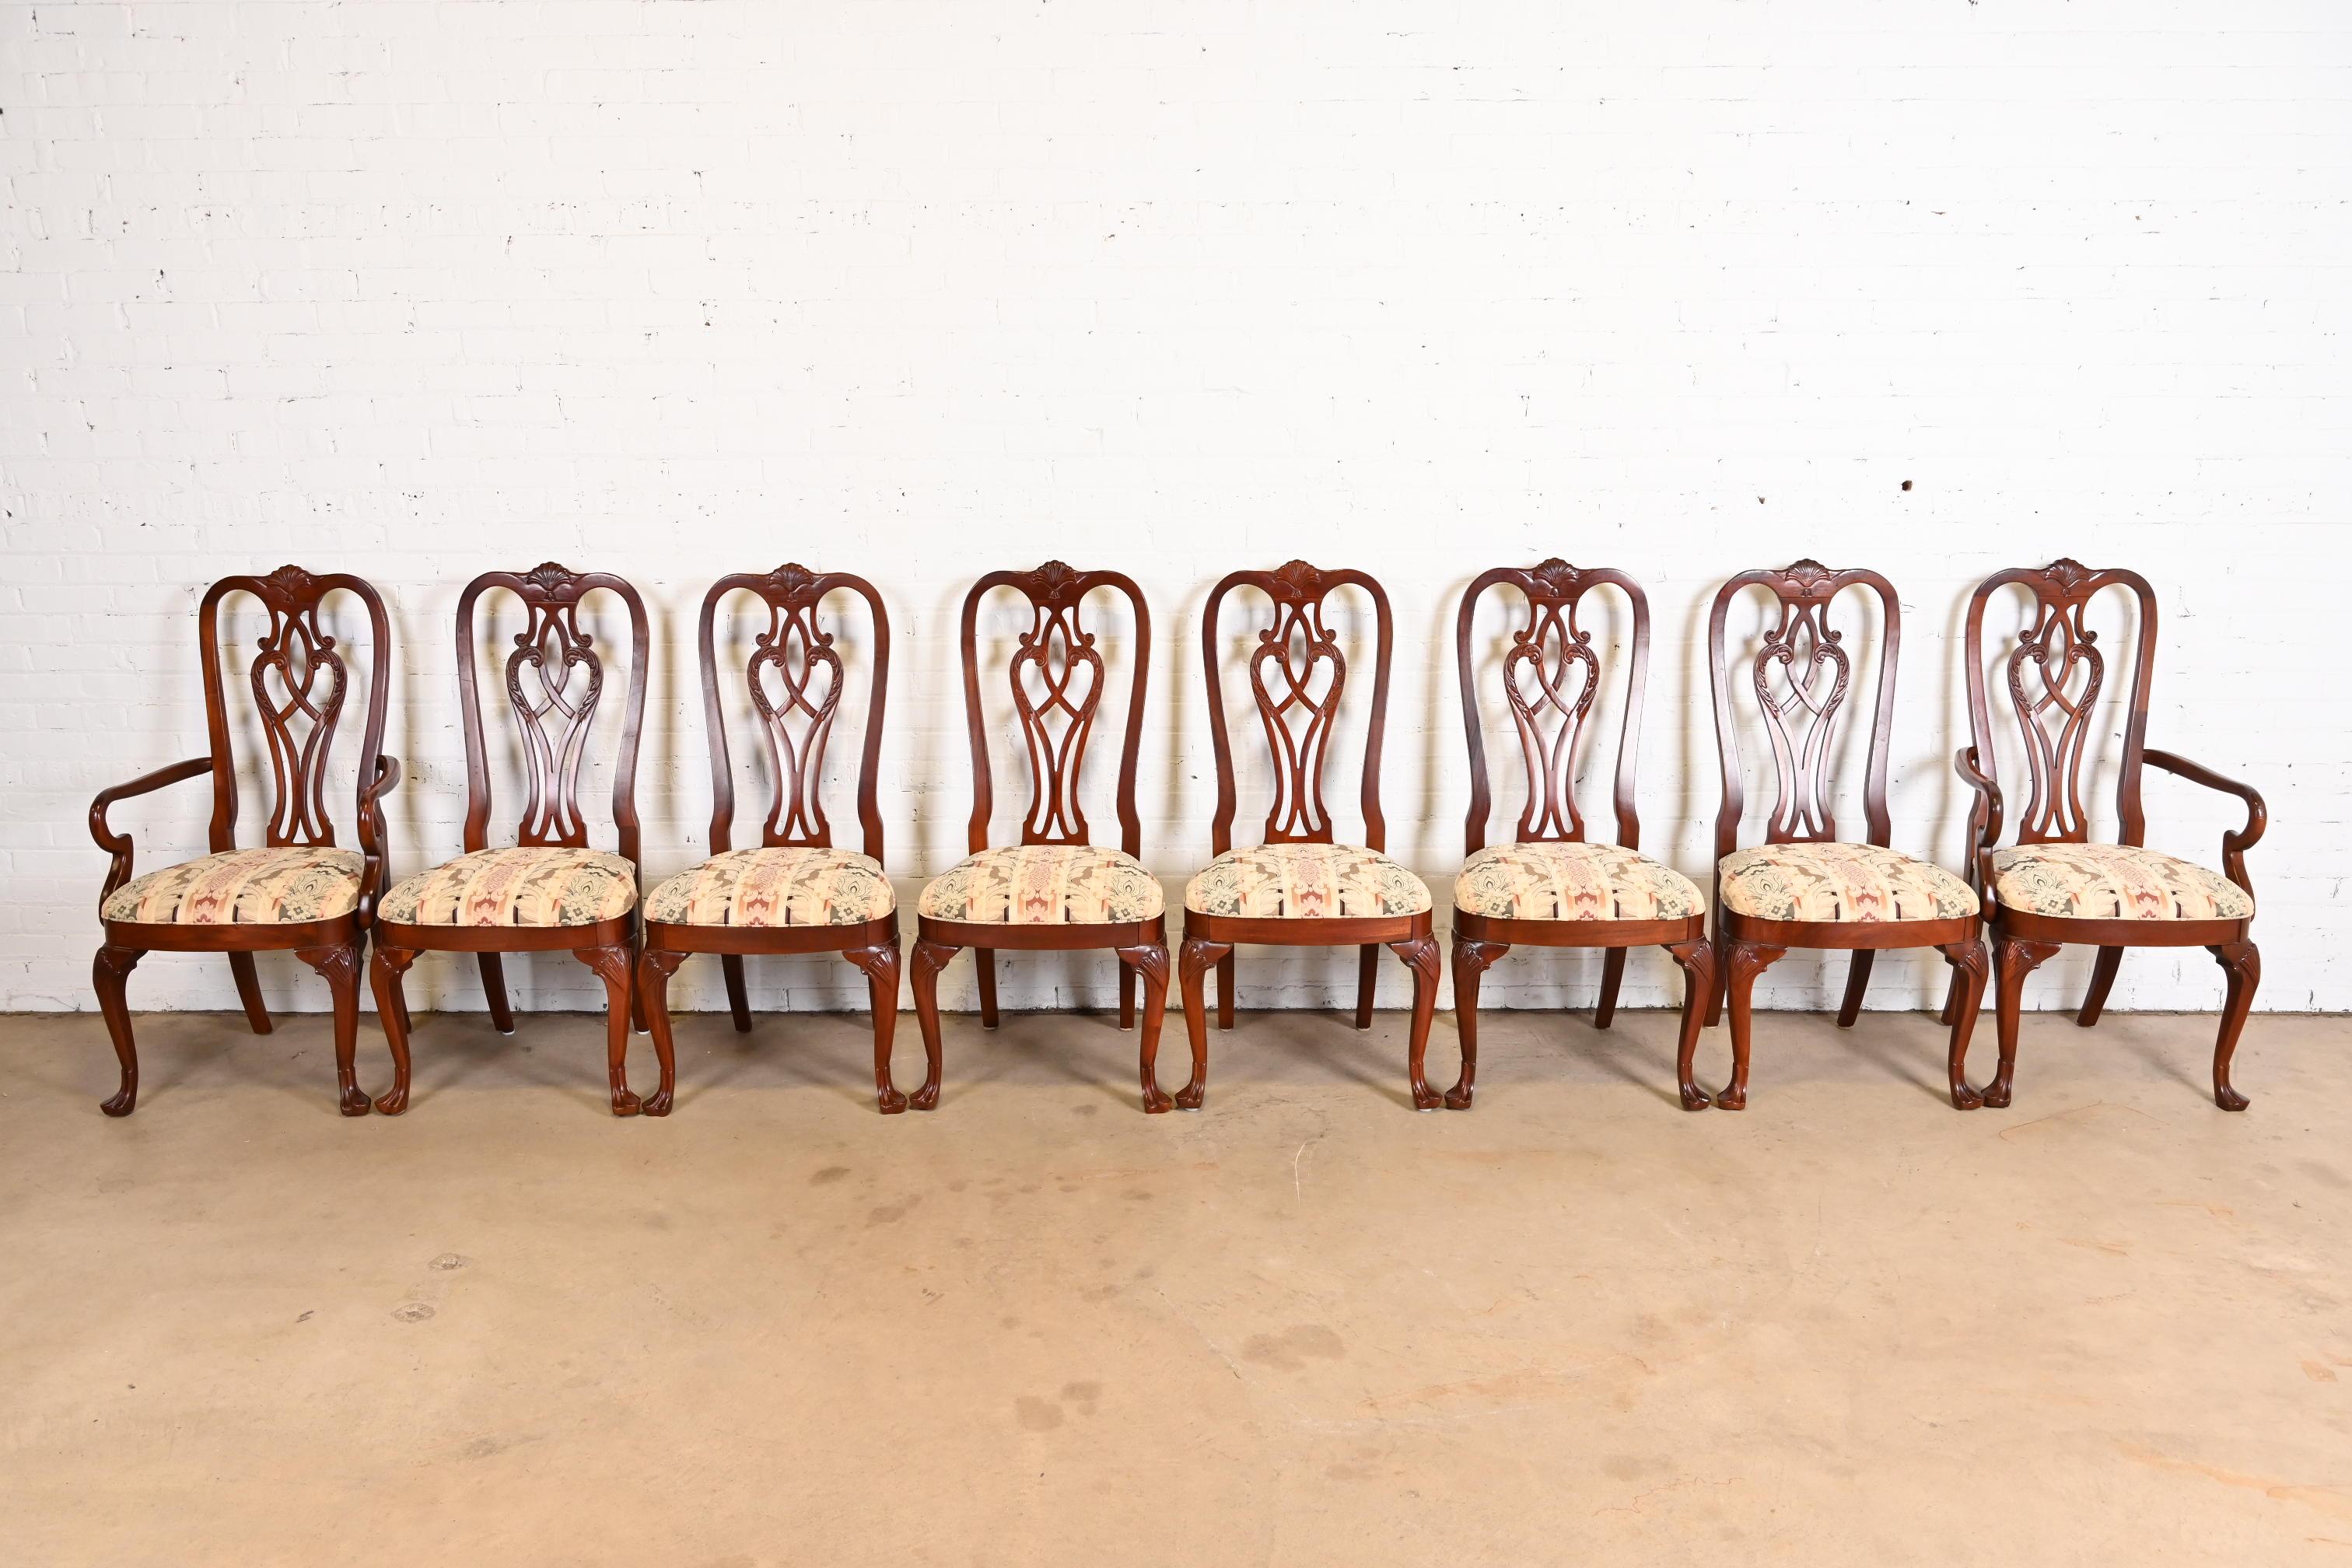 A gorgeous set of eight Georgian or Chippendale style dining chairs

USA, Circa 1980s

Carved solid mahogany frames, with damask upholstered seats.

Measures:
Side chairs - 22